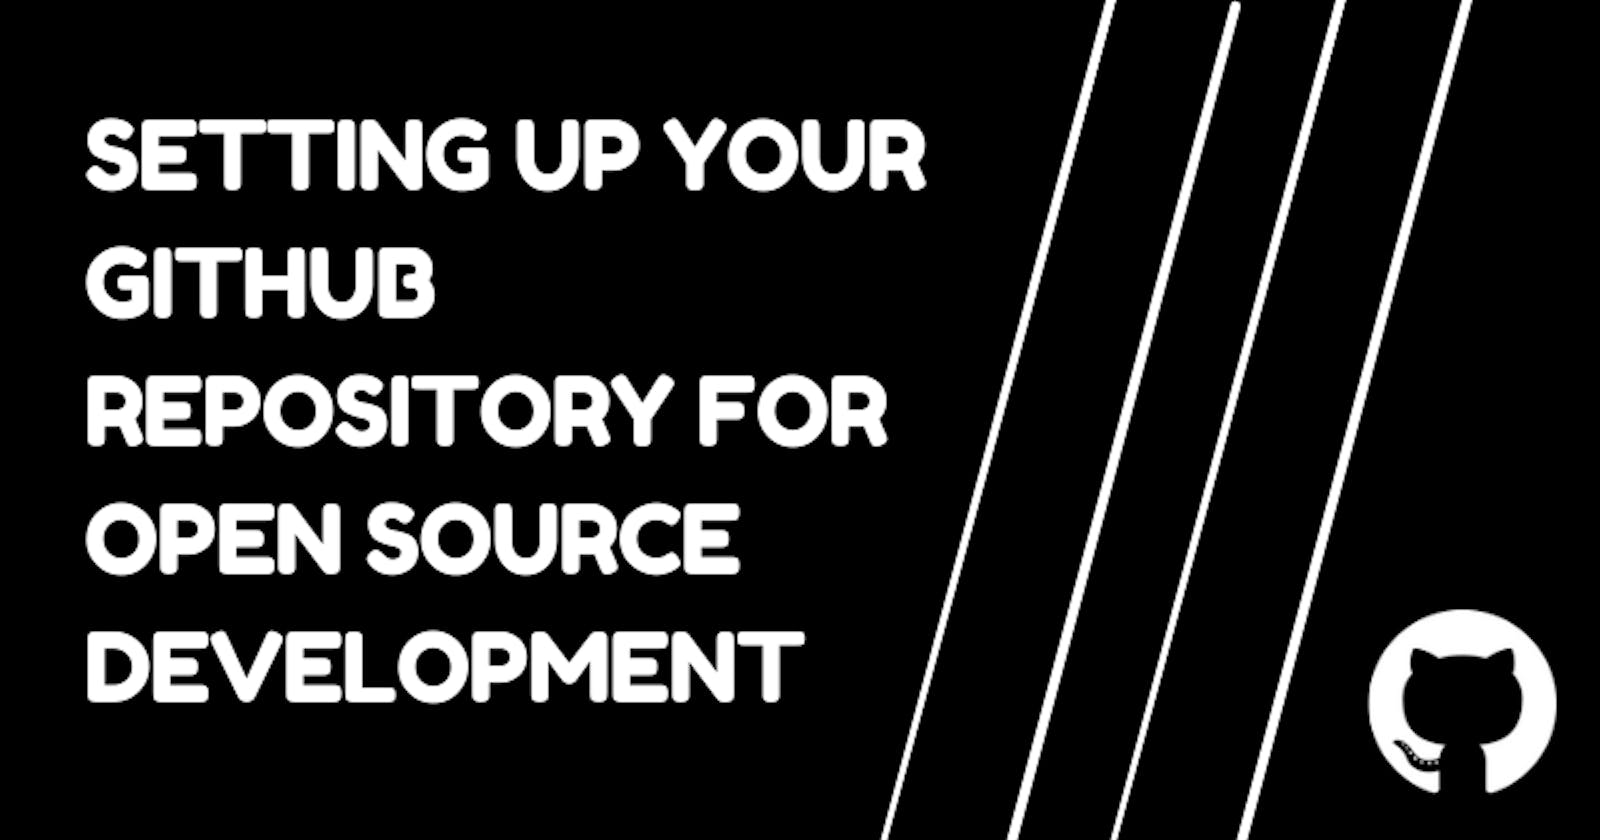 Setting up your GitHub Repository for Open Source Development